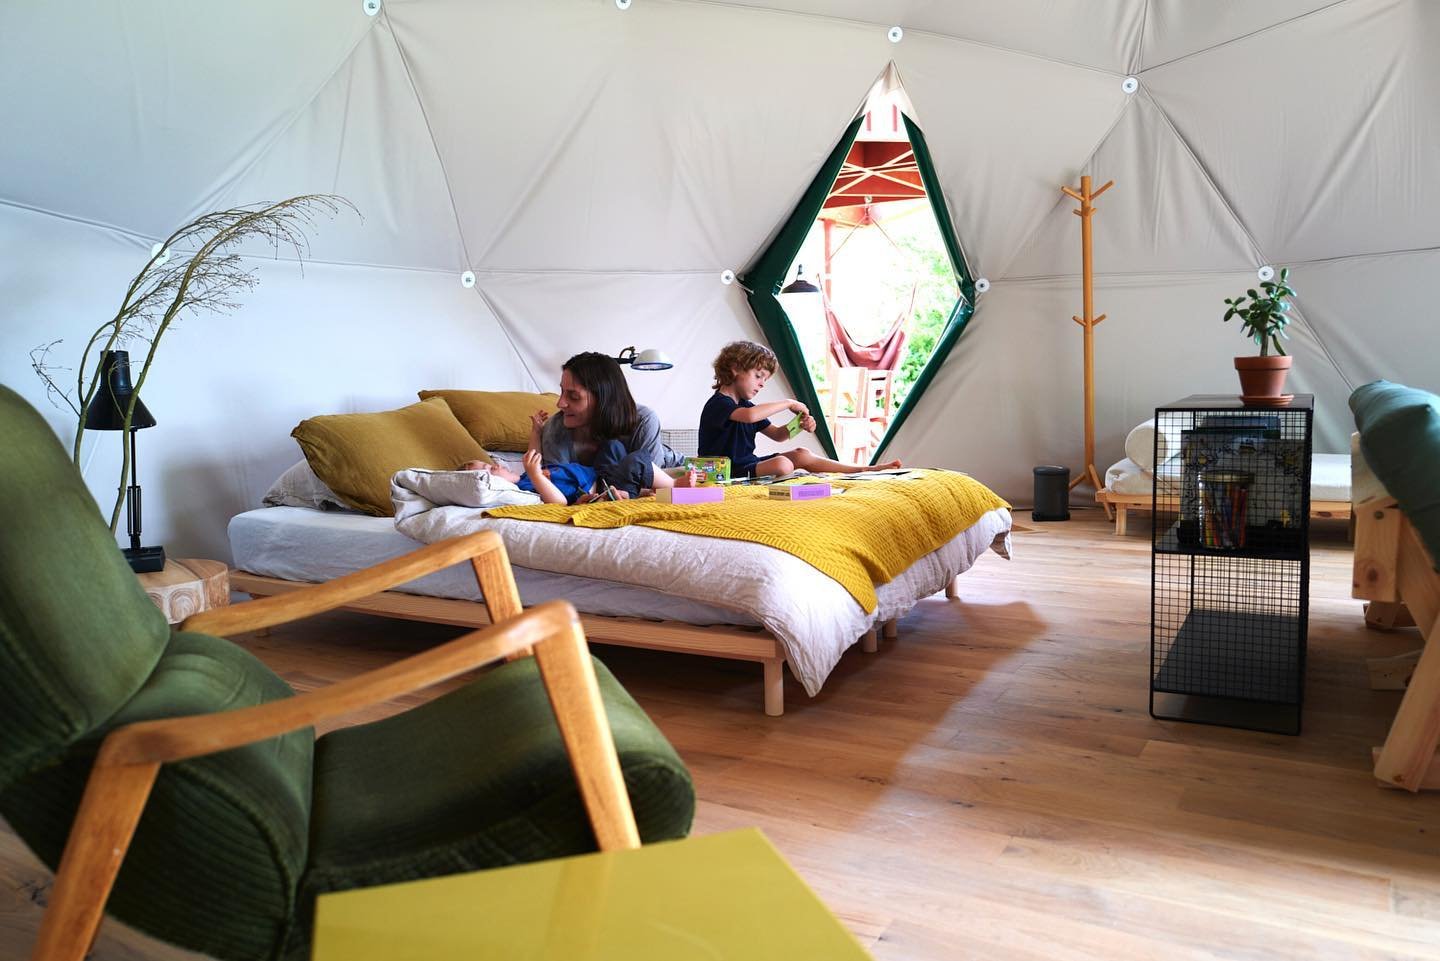 Time to connect in the dome. Camping without the stress. #praktyka #staycation #glamping #glampingdevon #northdevon